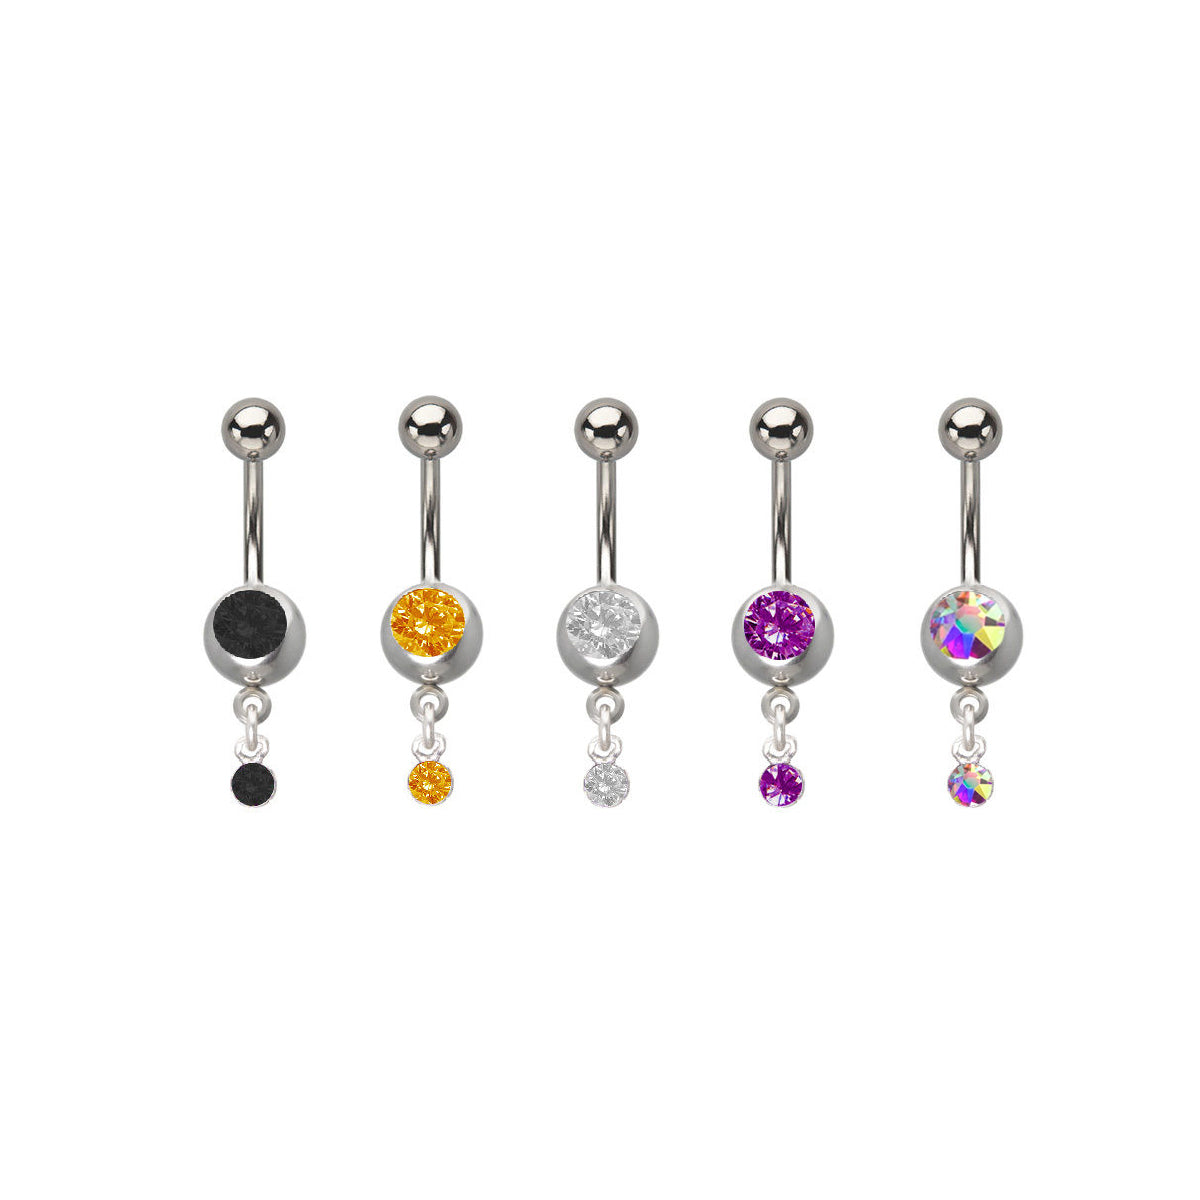 Belly Button Ring 14ga Jeweled High Polish Surgical Steel - 5 Pieces